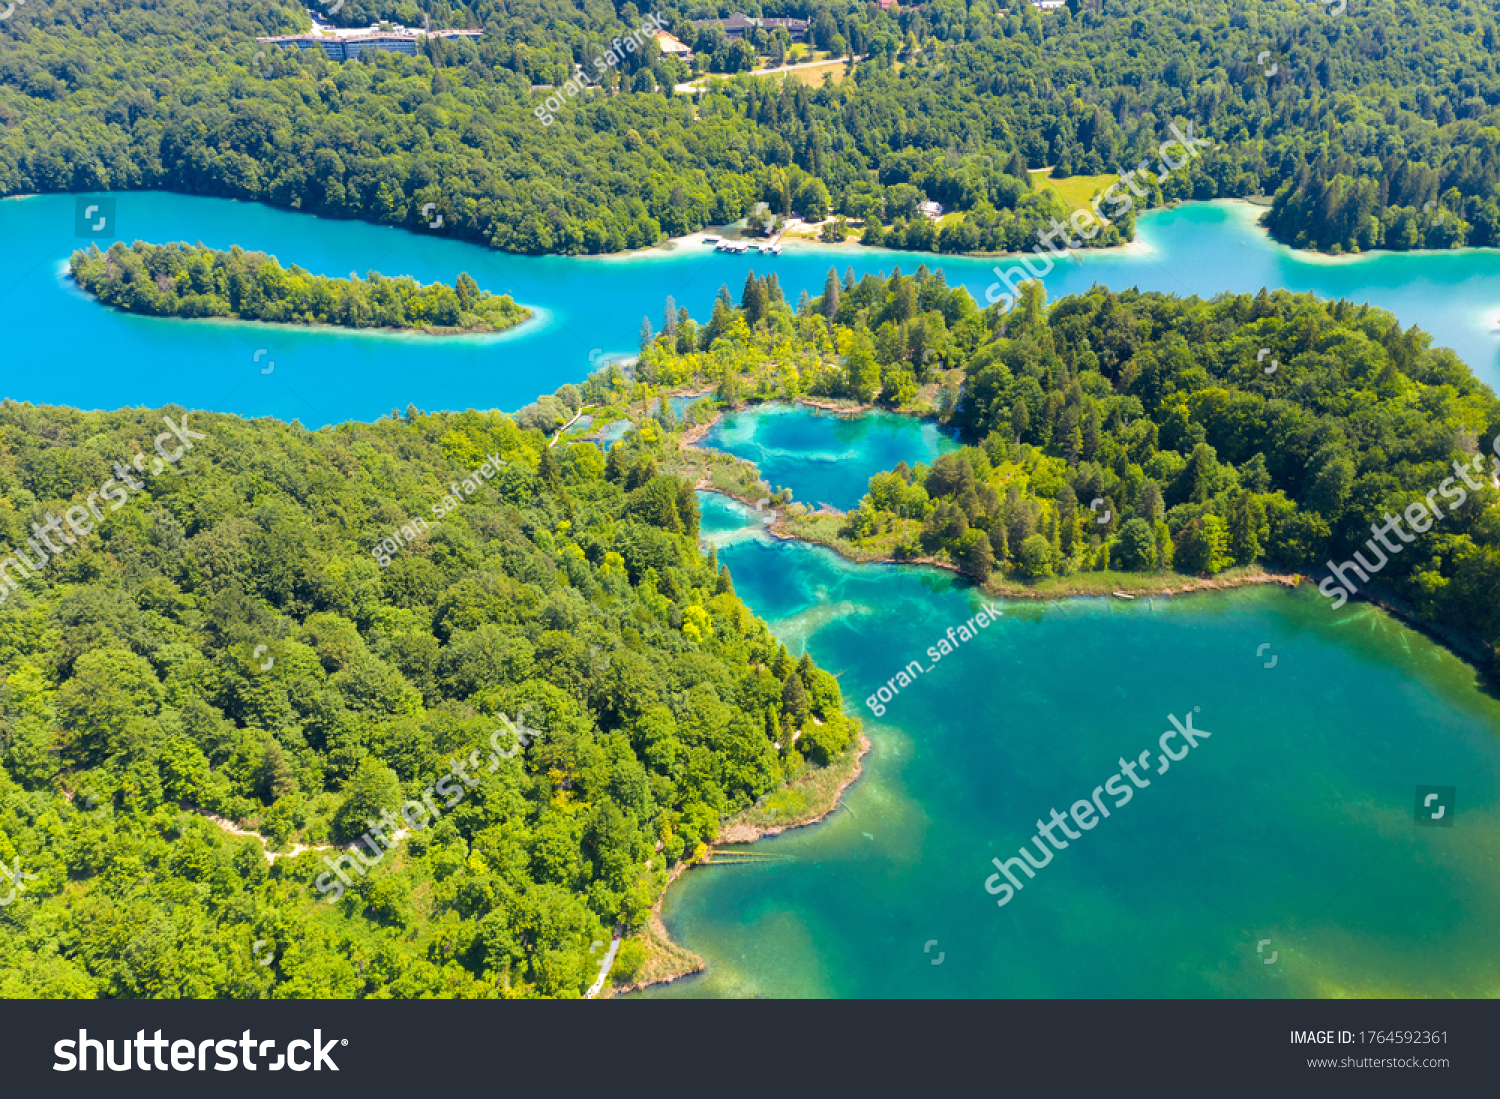 Aerial view of the Plitvice Lakes National Park, Croatia #1764592361